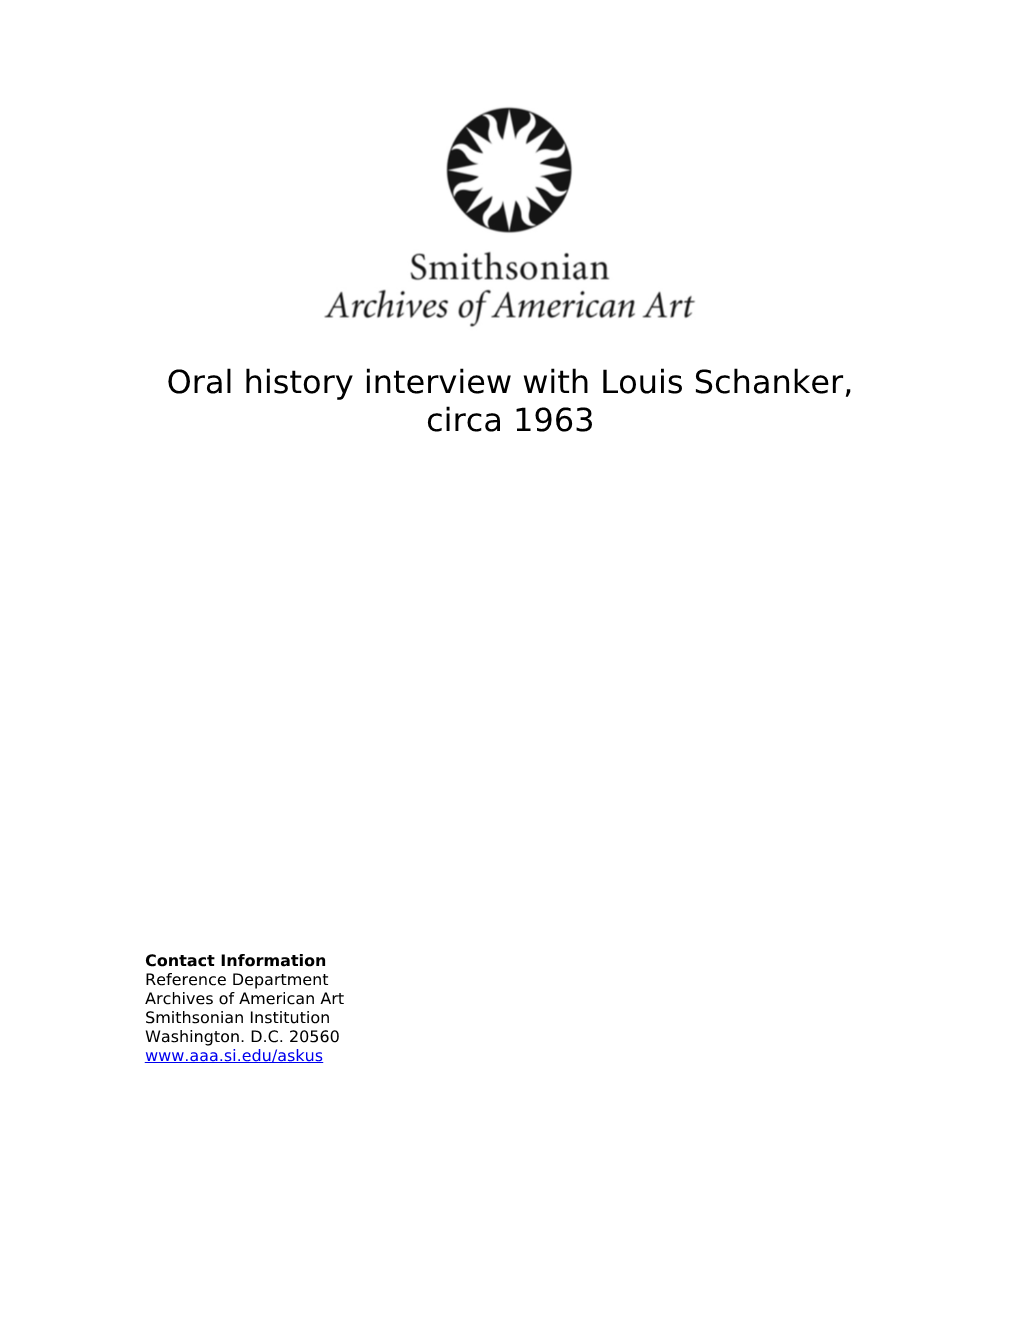 Oral History Interview with Louis Schanker, Circa 1963